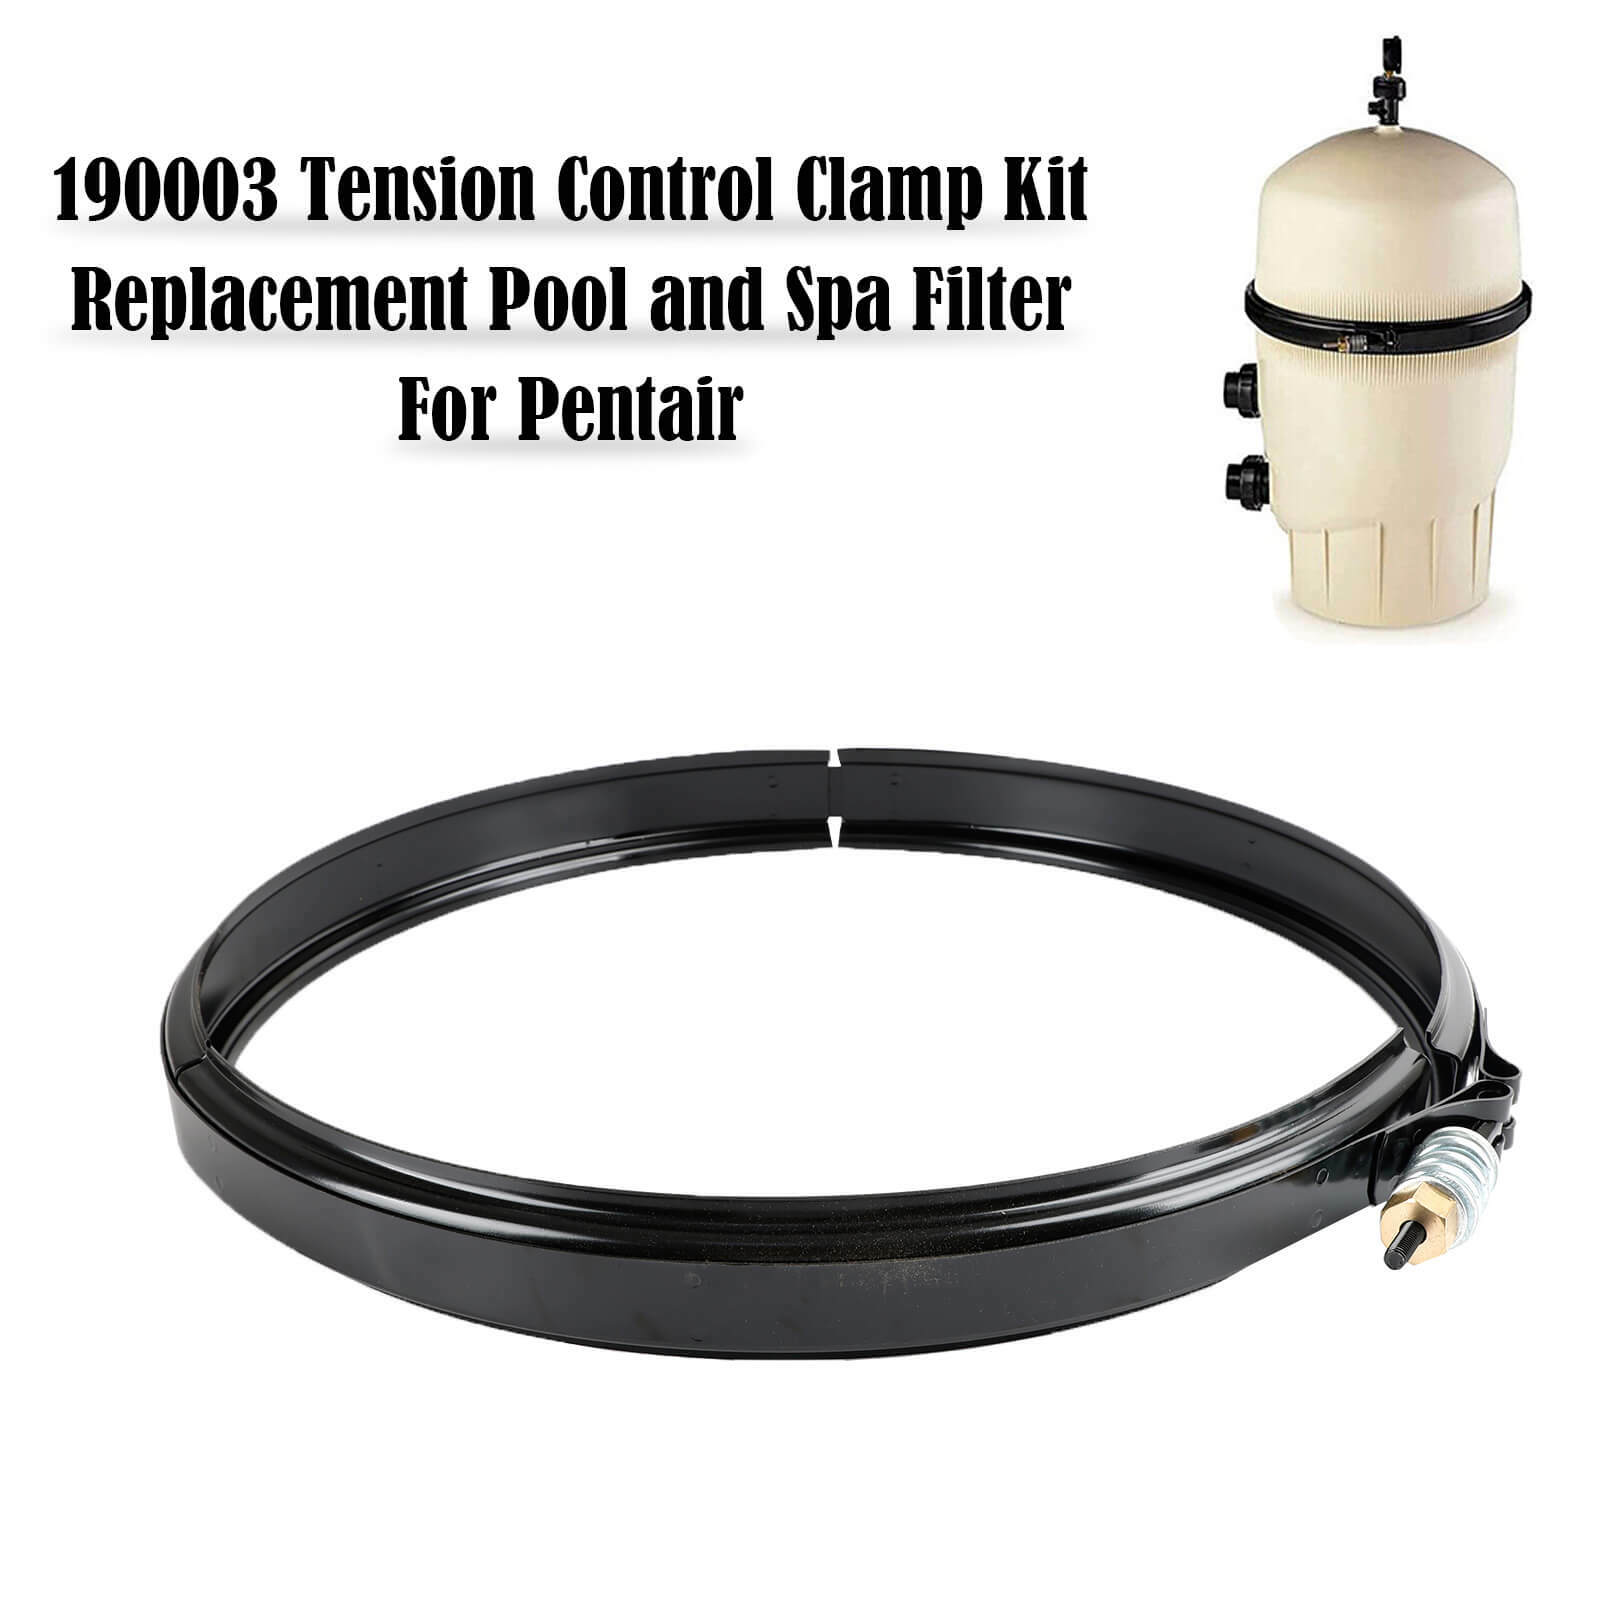 190003 Tension Control Clamp Kit Replacement Pool and Spa Filter For Pentair